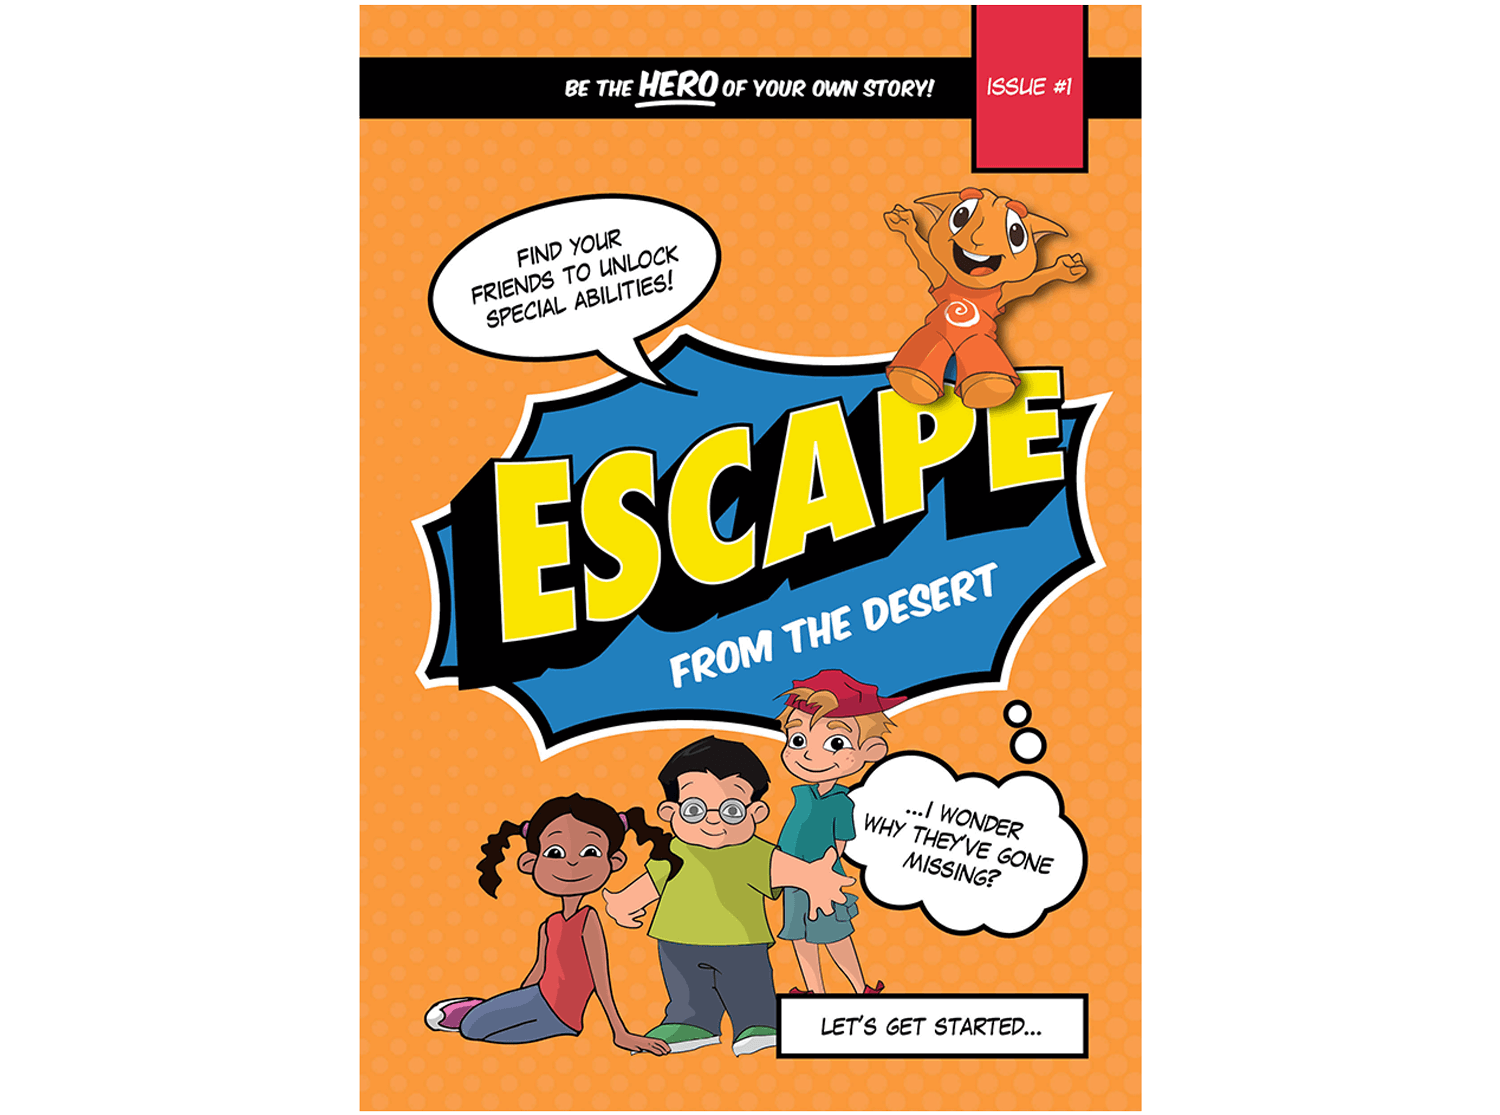 Front cover of Escape from the Desert - A children's book developed by Amergin in collaboration with Uniting Care